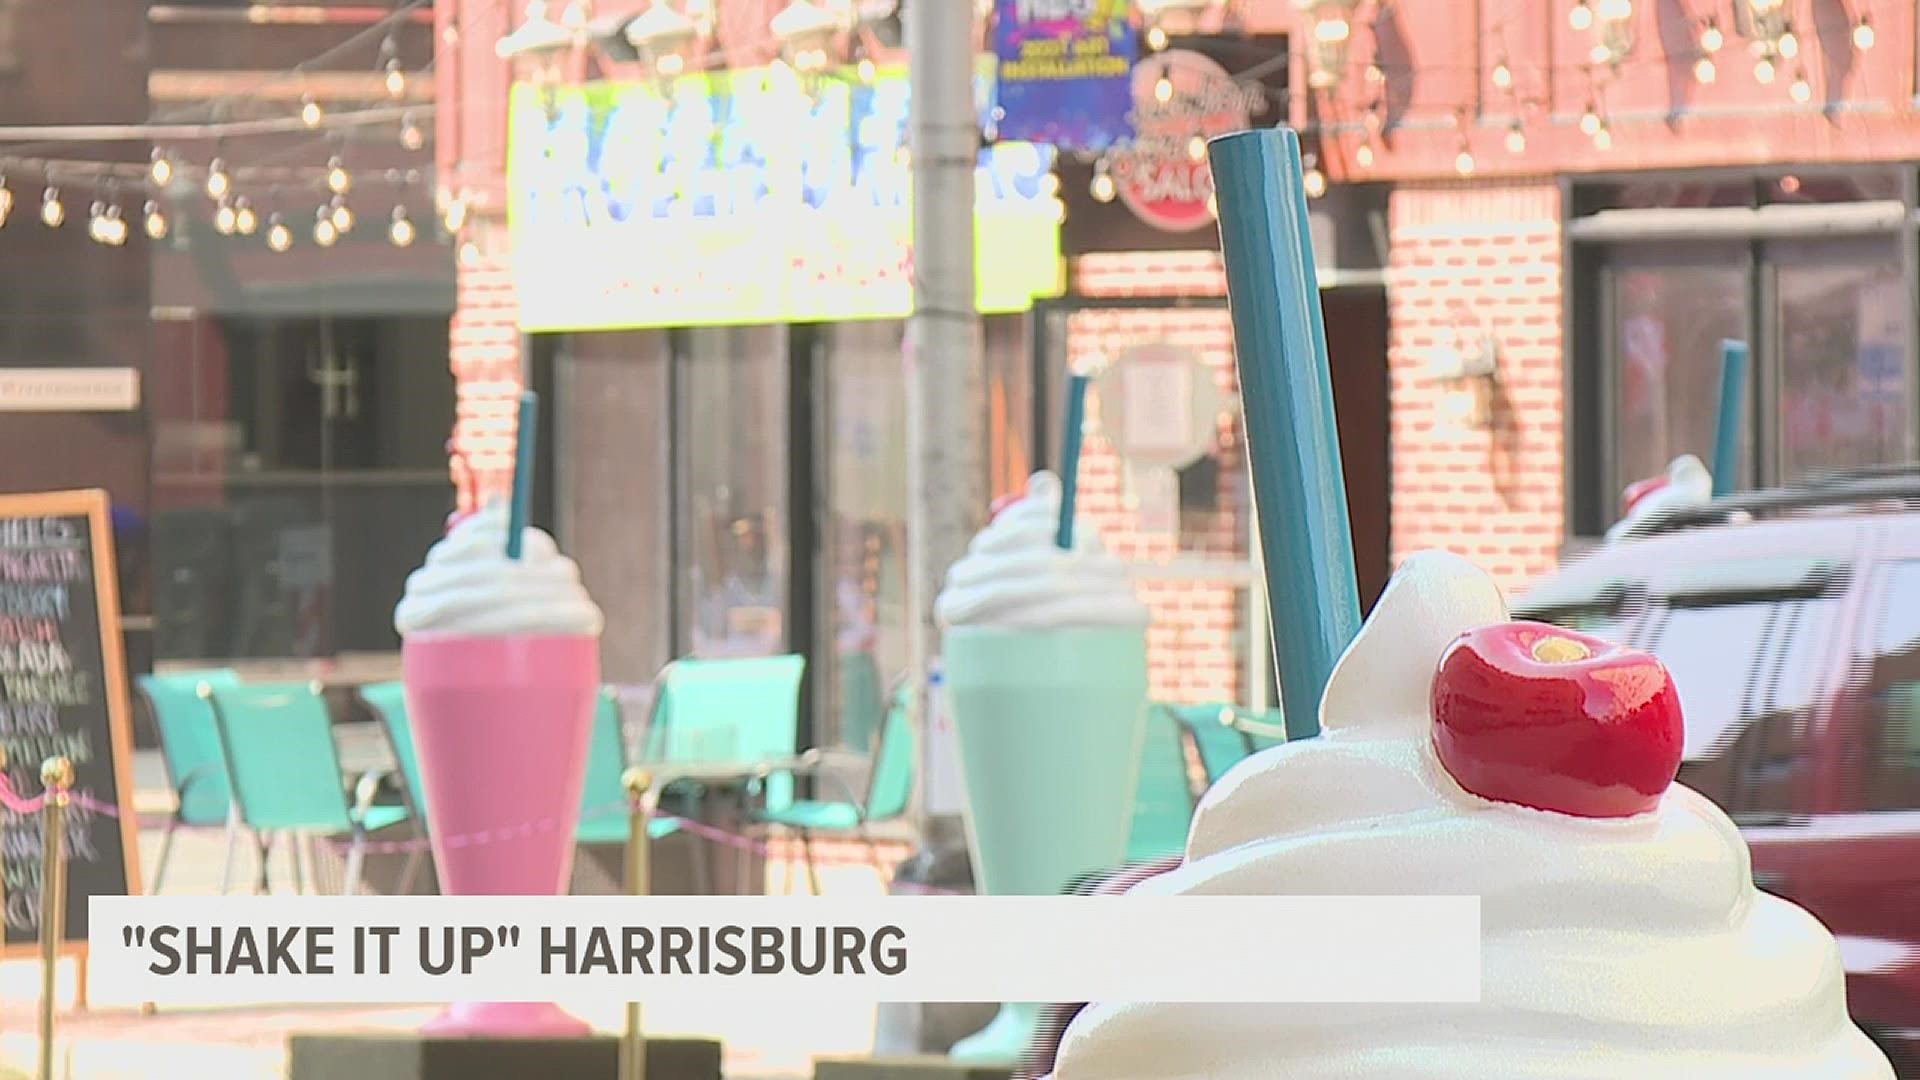 The multi-milkshake masterpiece is meant to bring people downtown with the chance to win $500 each day.